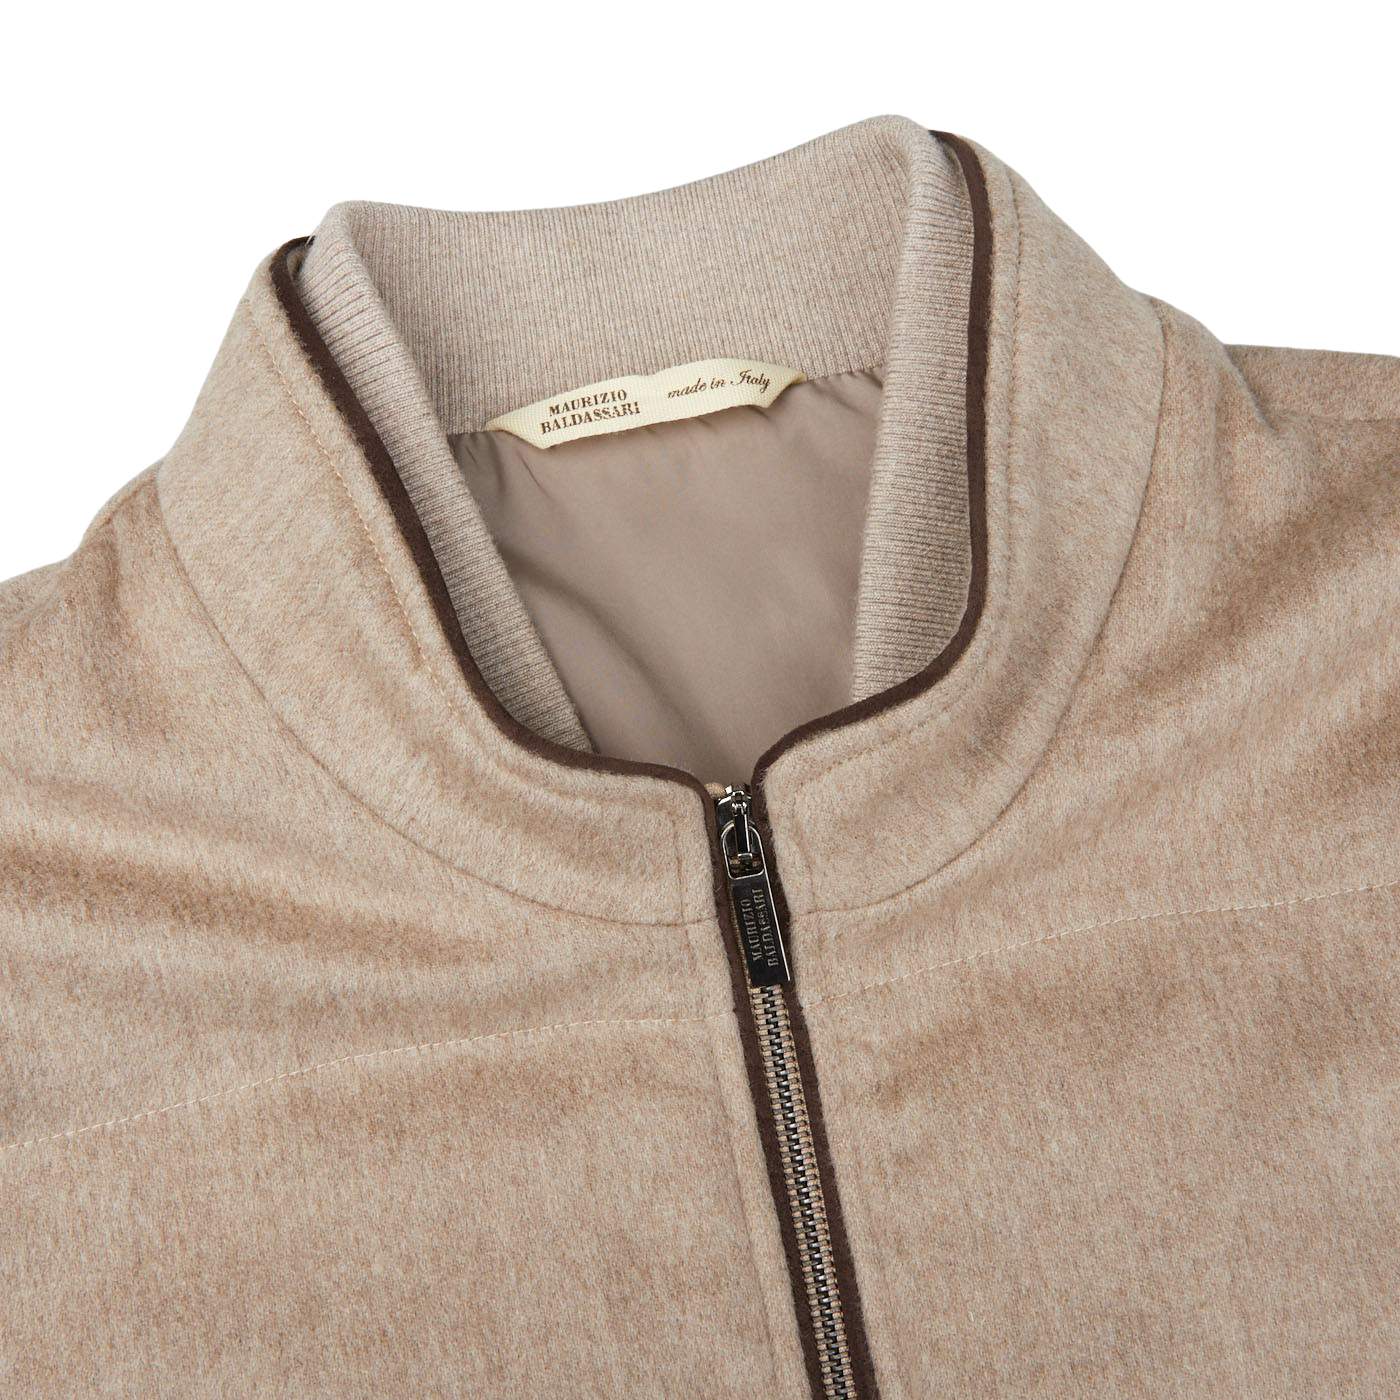 A Maurizio Baldassari Beige Water Repellent Pure Cashmere Gilet with a zipper on the front.